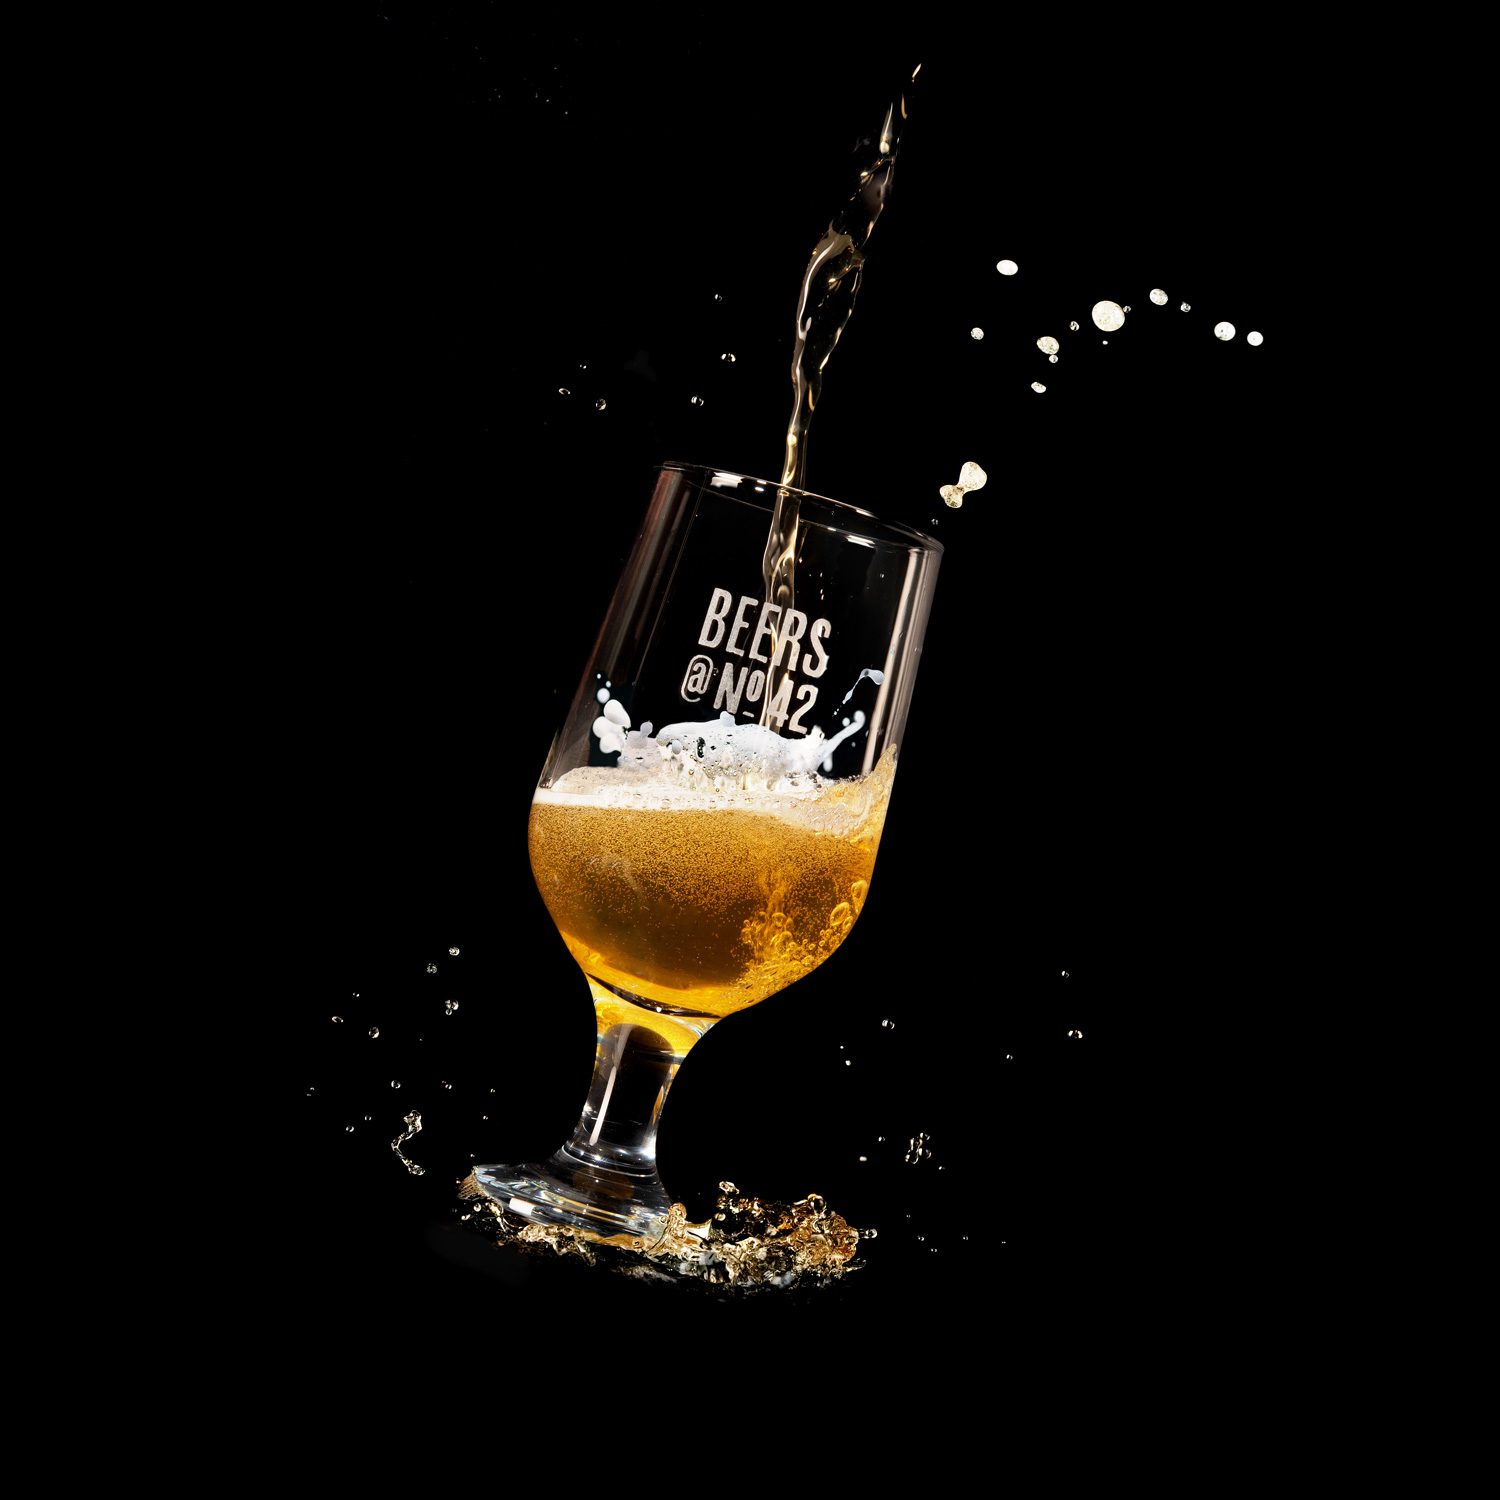 product photography showing beer being poured into a beer glass against a black background. There are splashes of beer coming from the top of the glass.